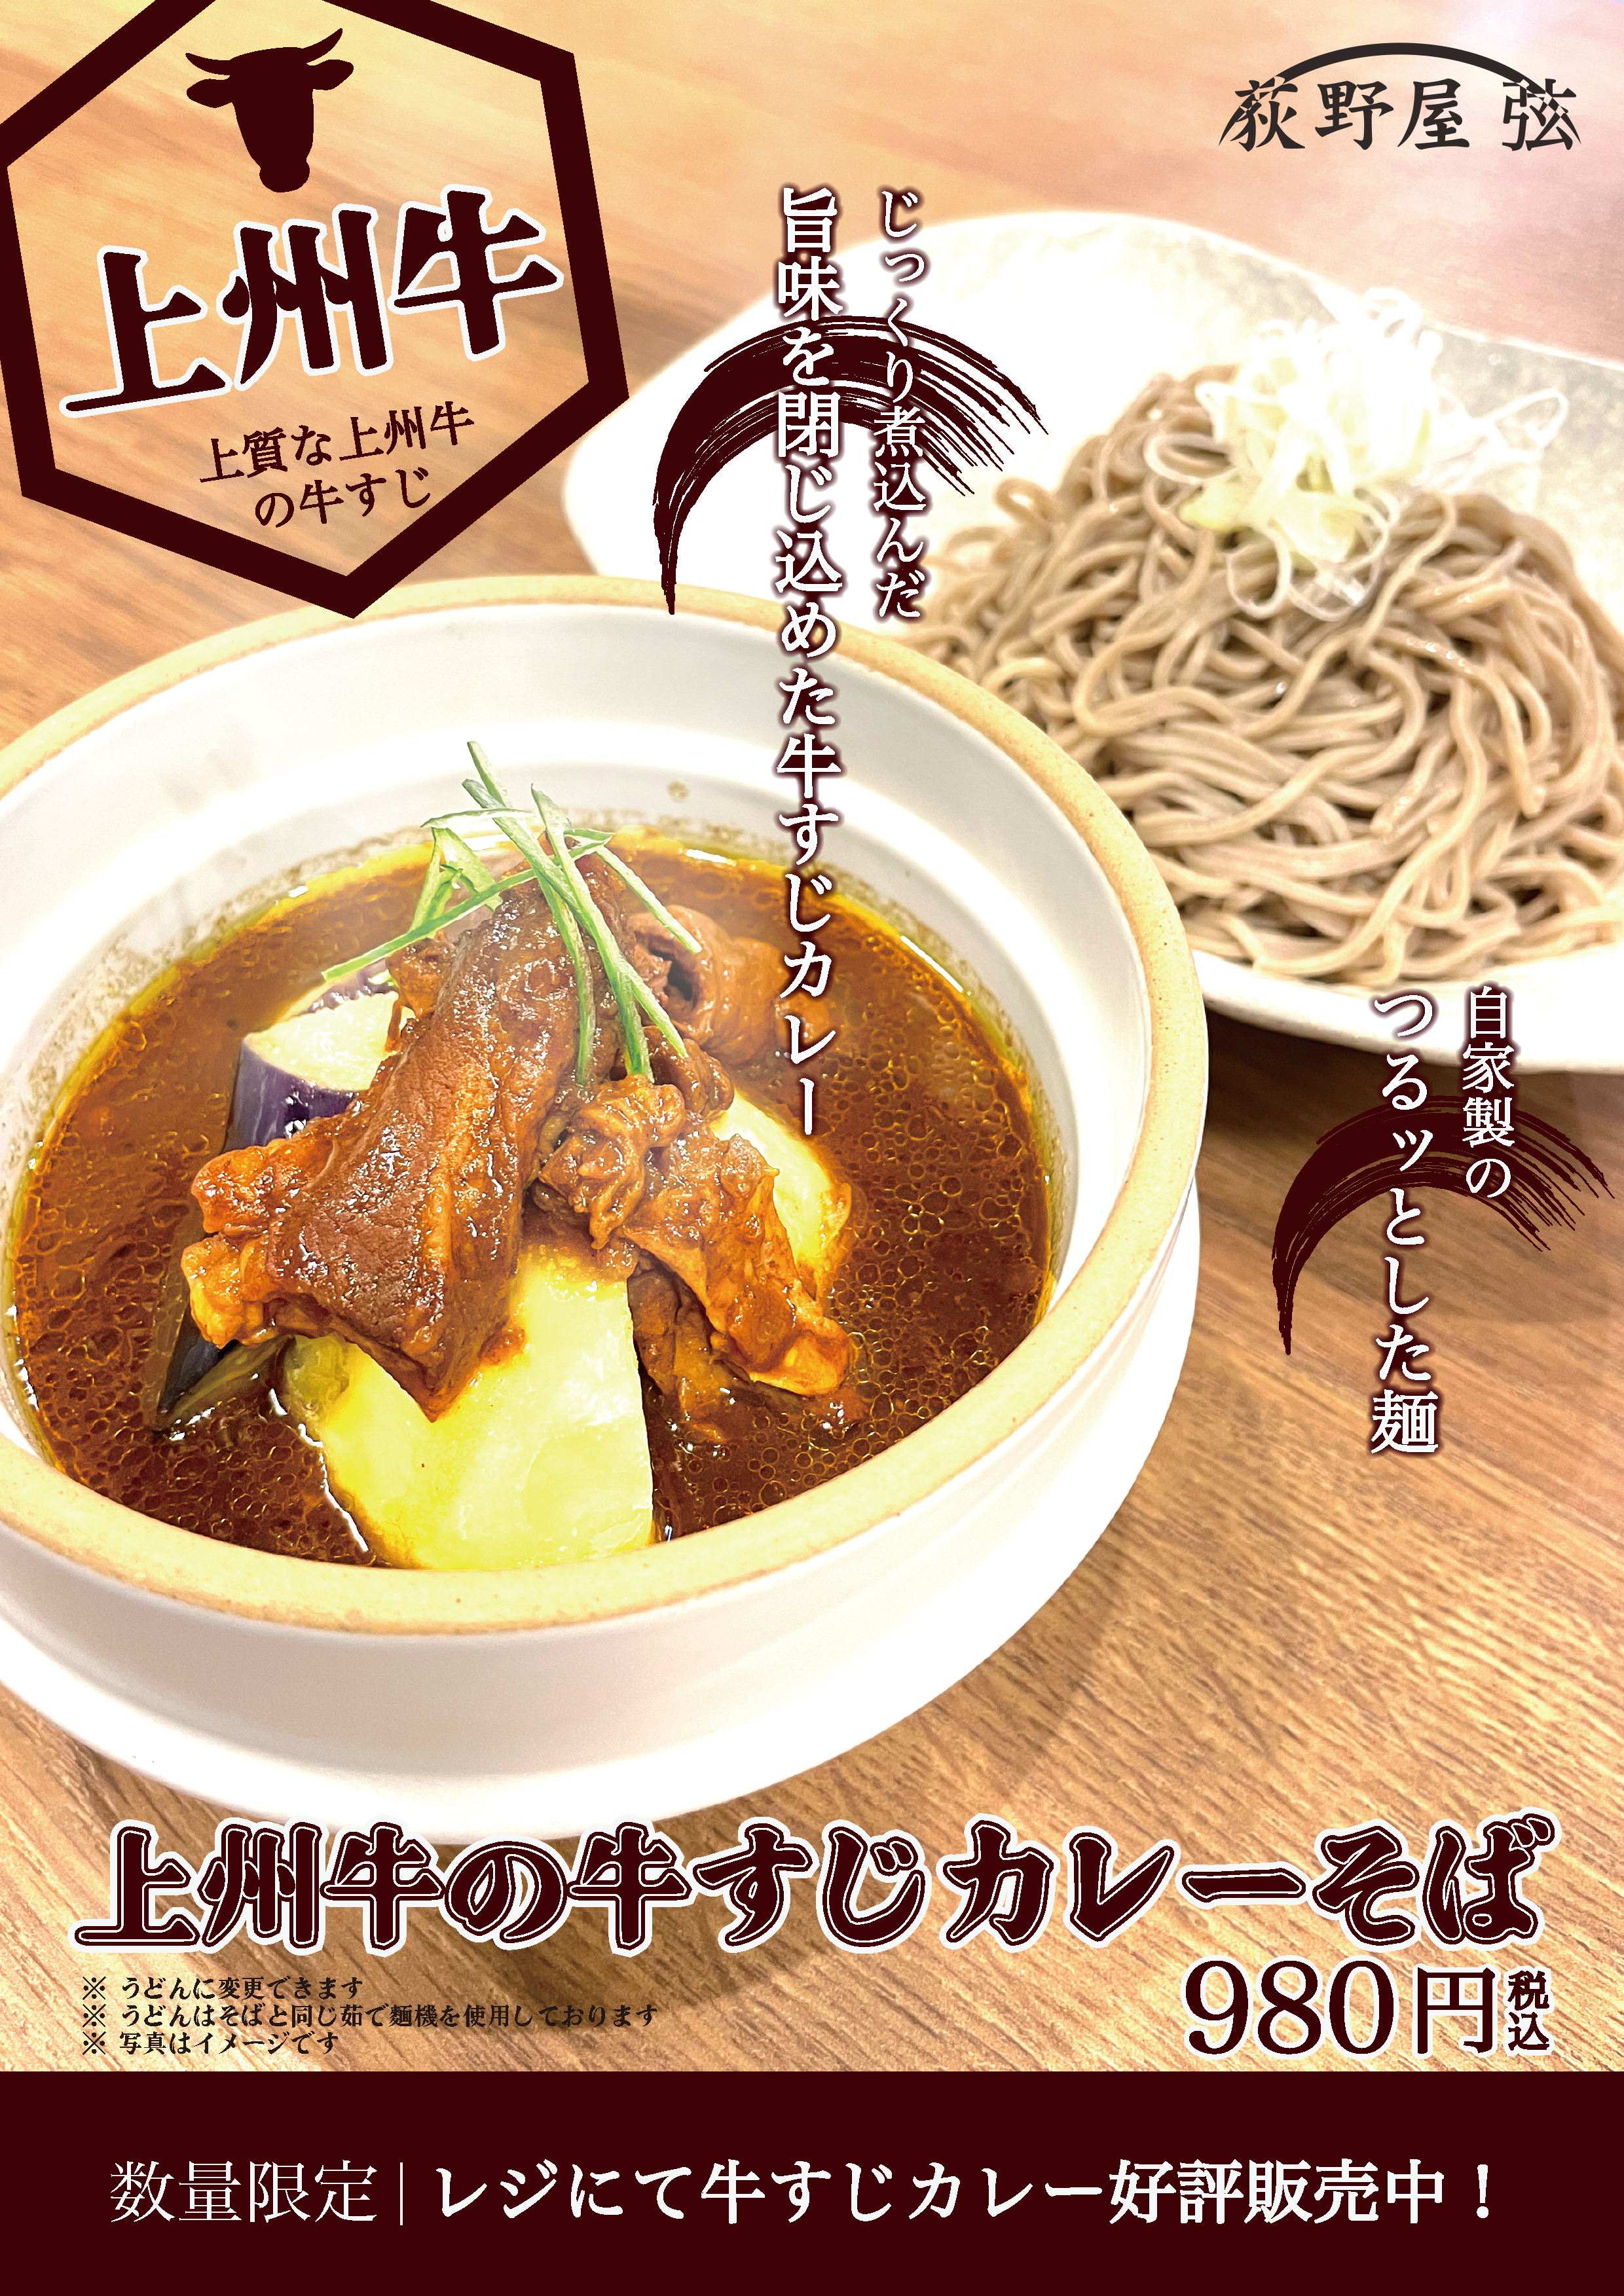 Curry Beef Soba Noodle